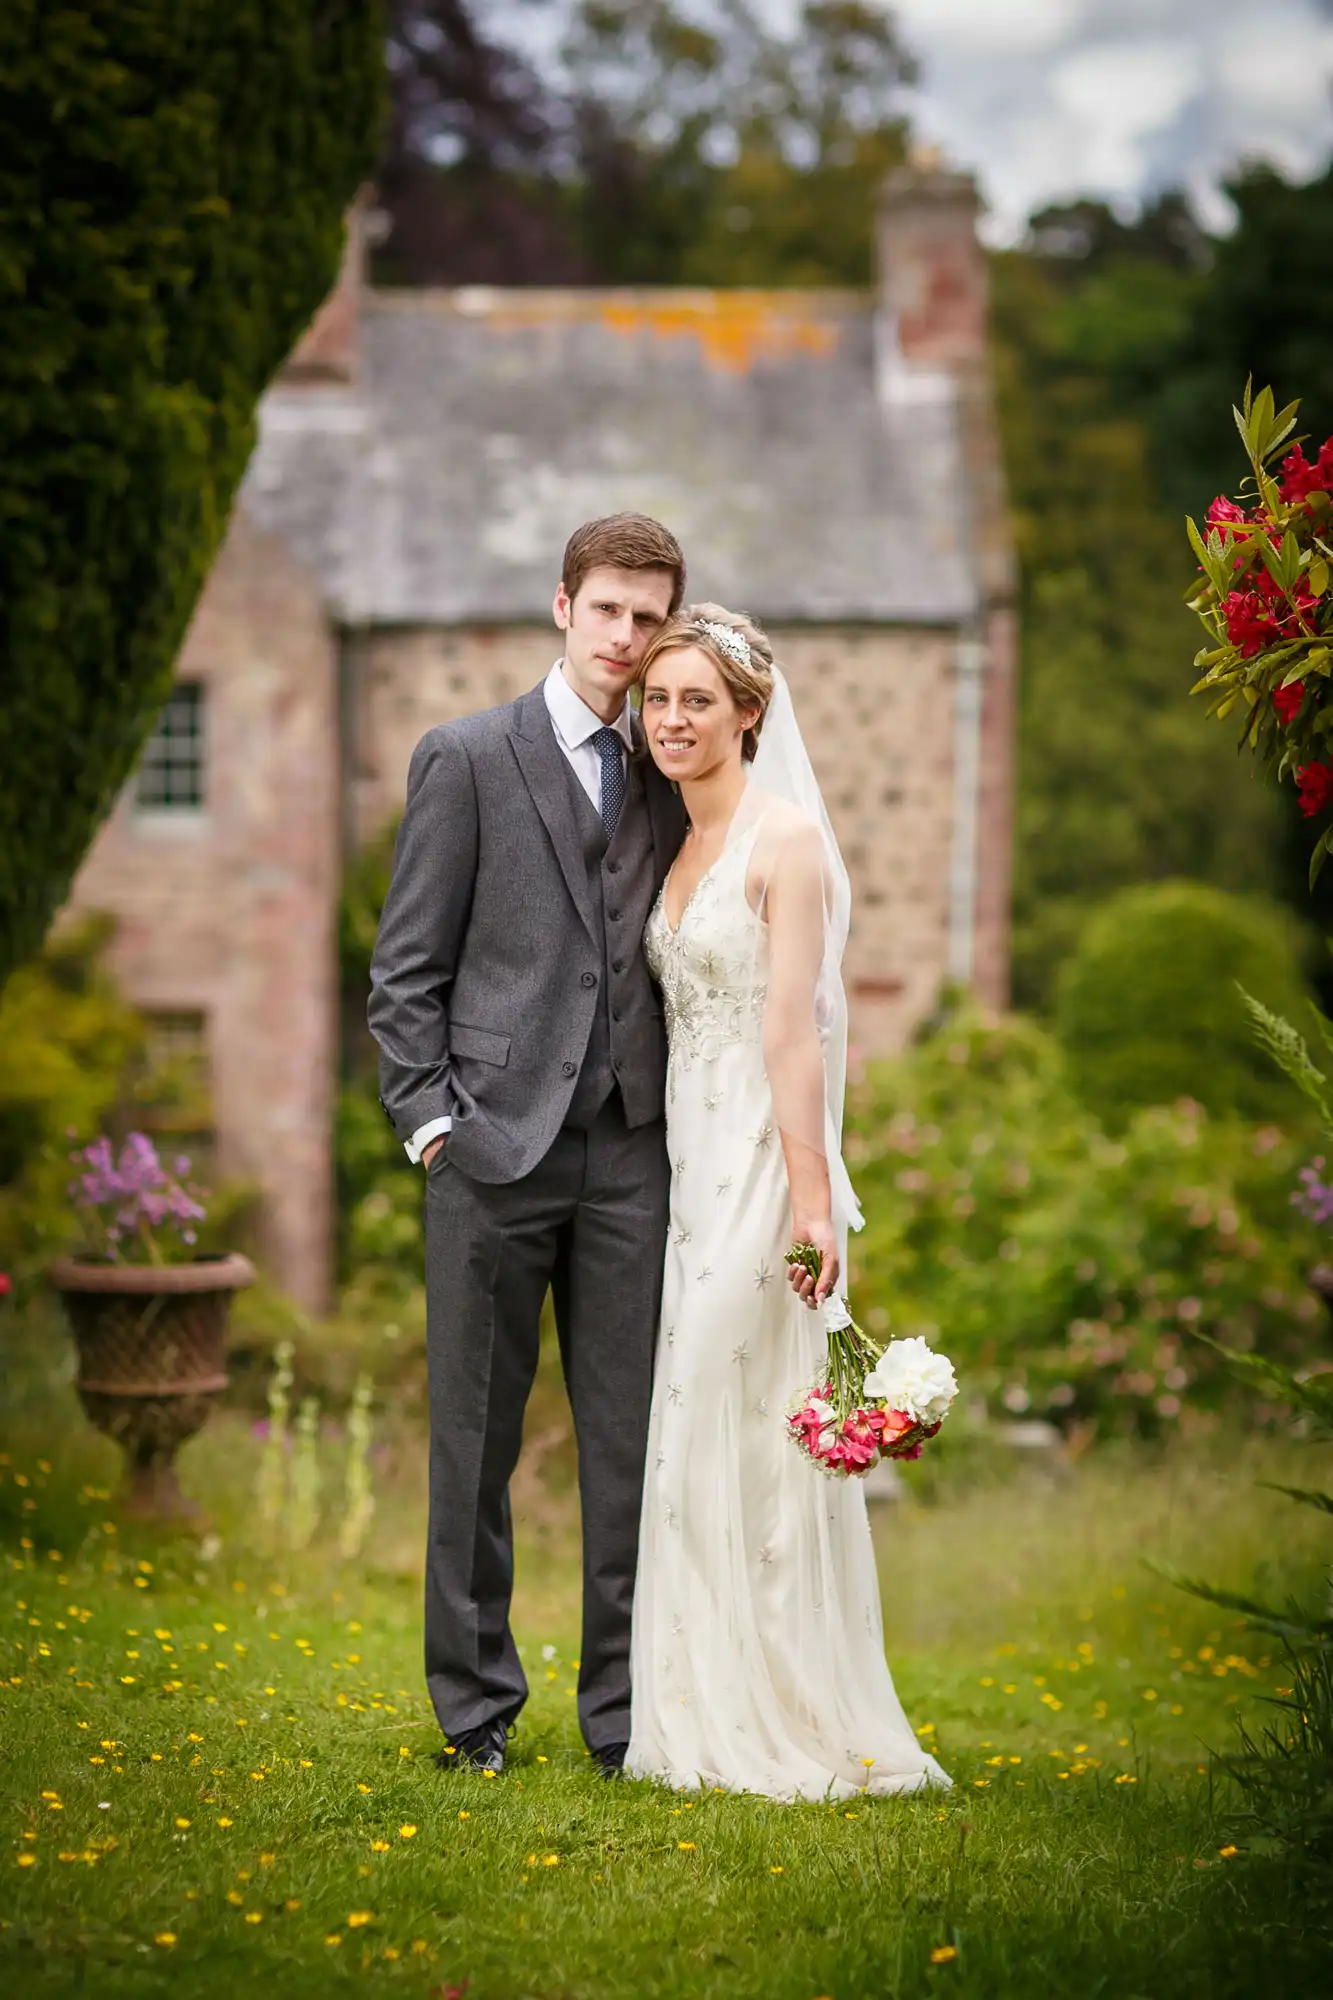 A bride and groom stand together in a garden, with the bride holding a bouquet and the groom in a gray suit, with a historic stone building in the background.